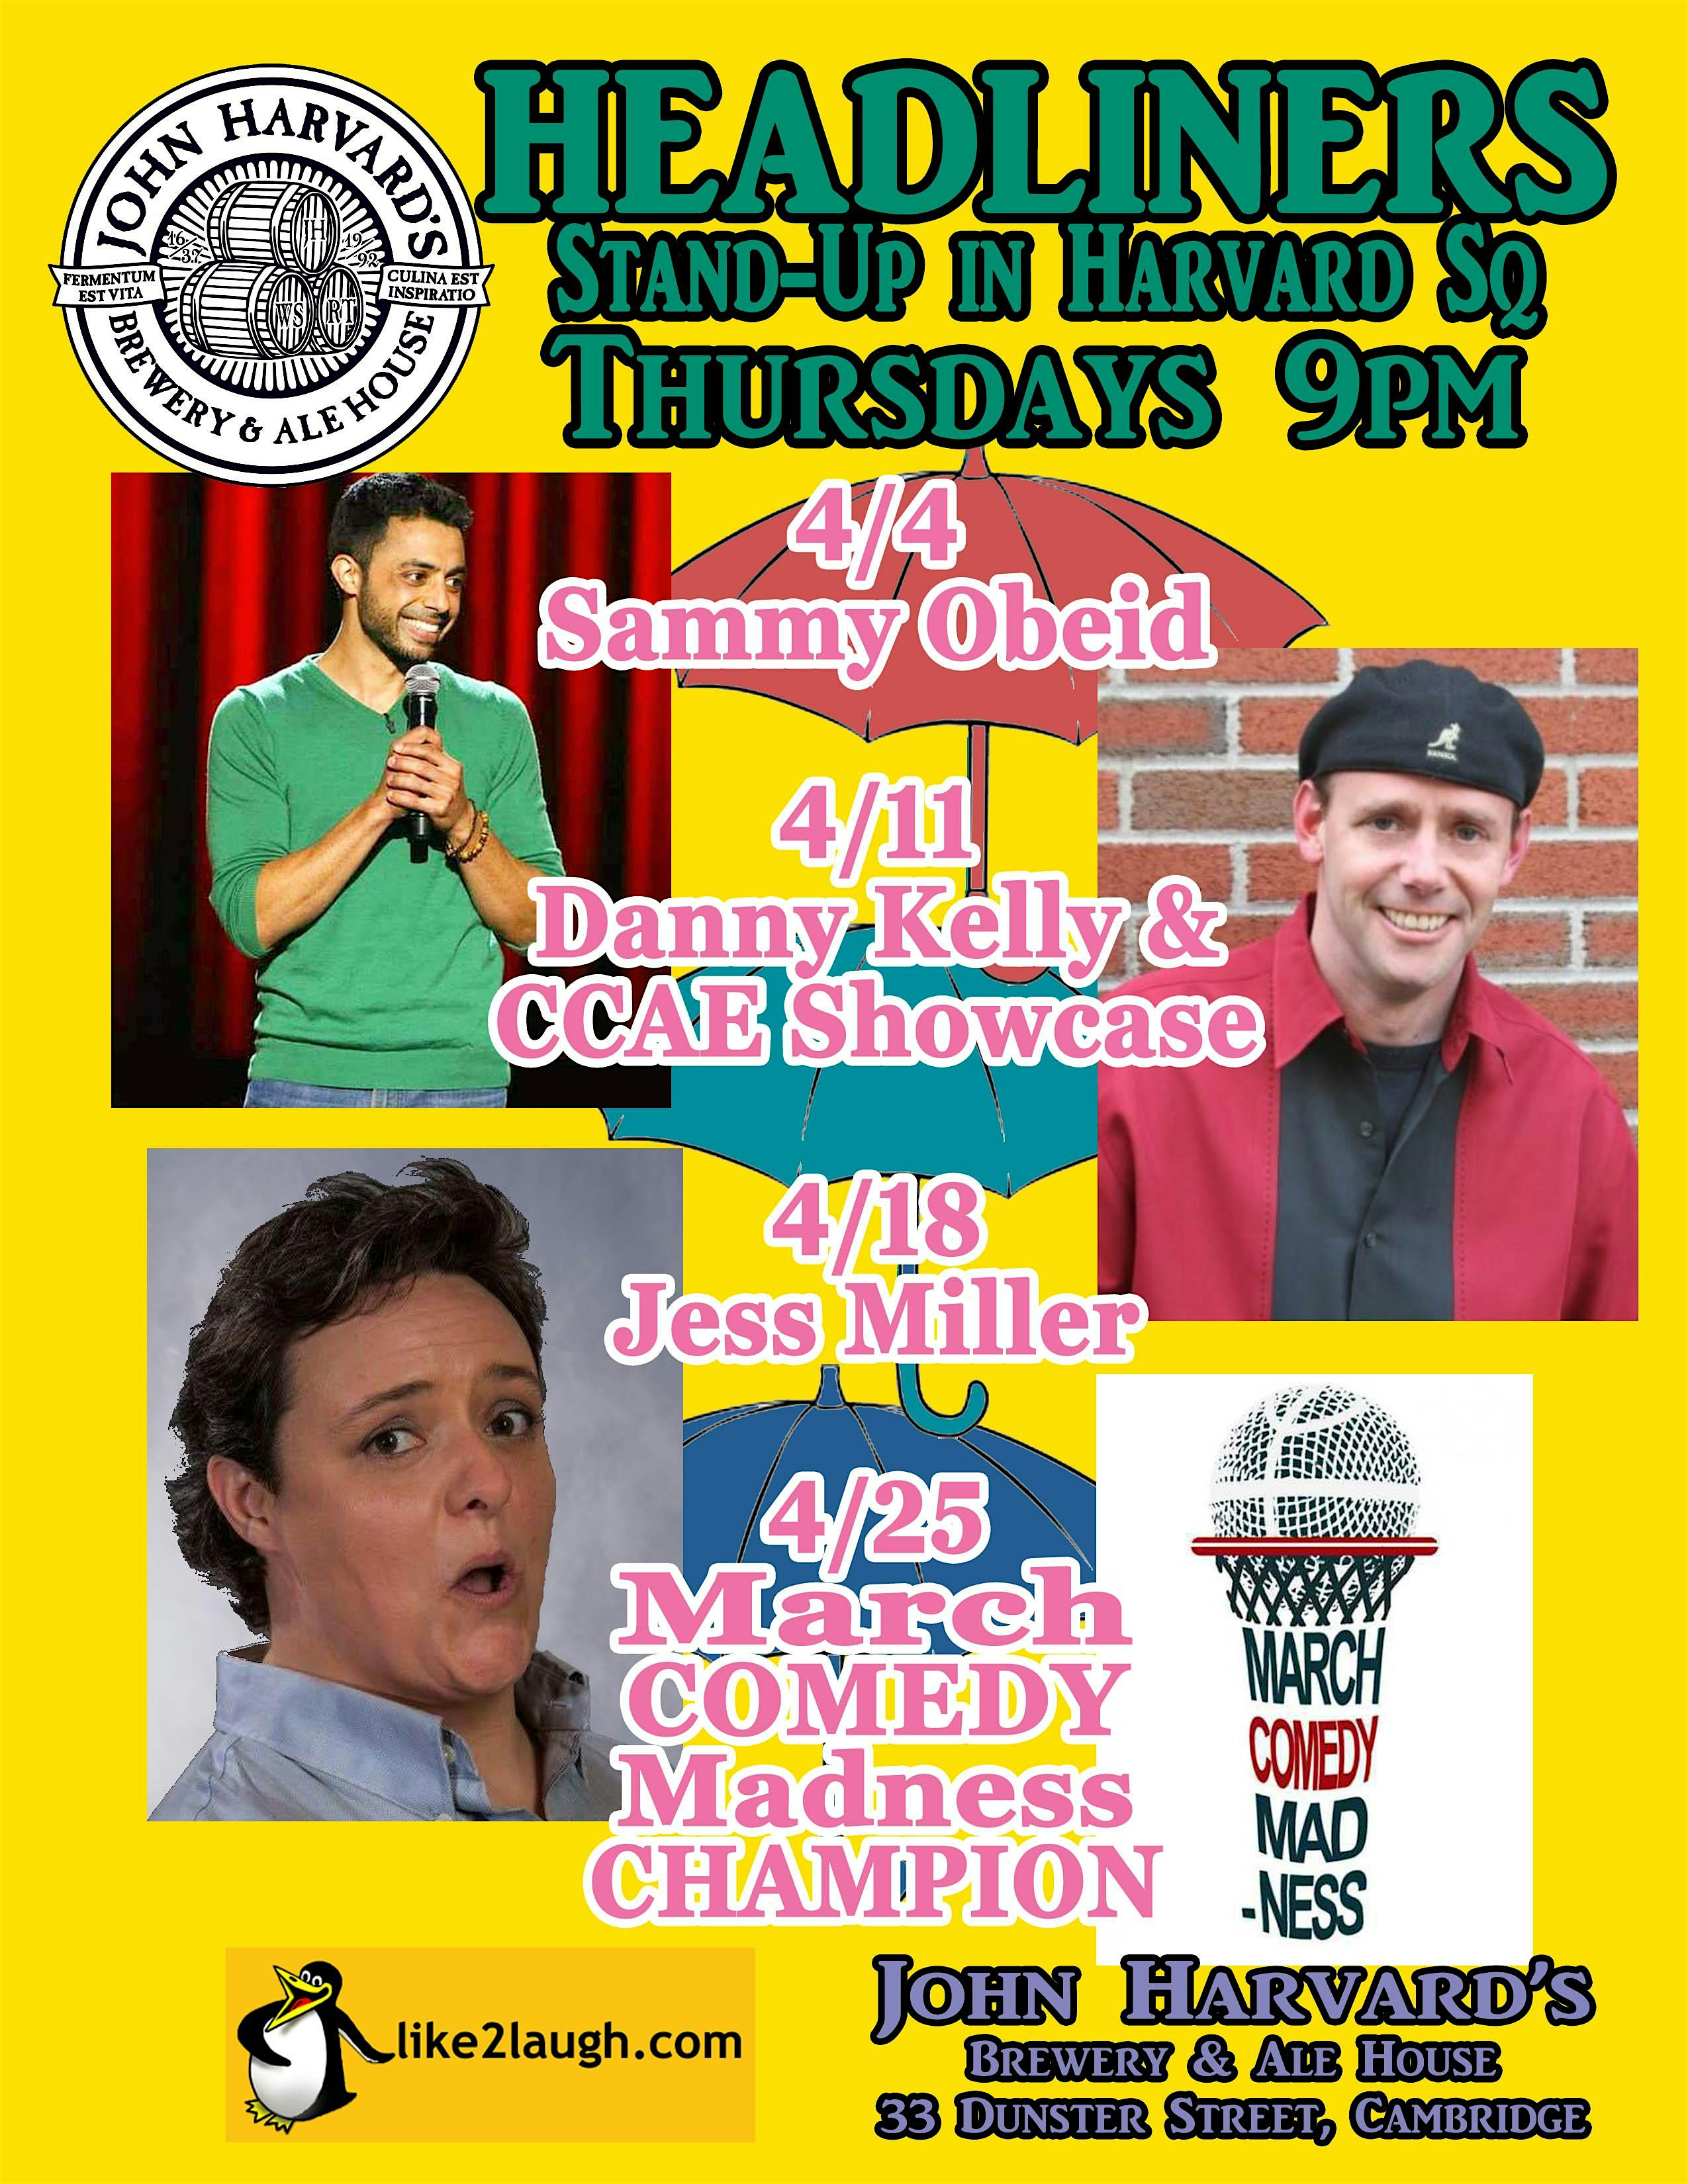 A1 Headliners Stand-Up in Harvard Square